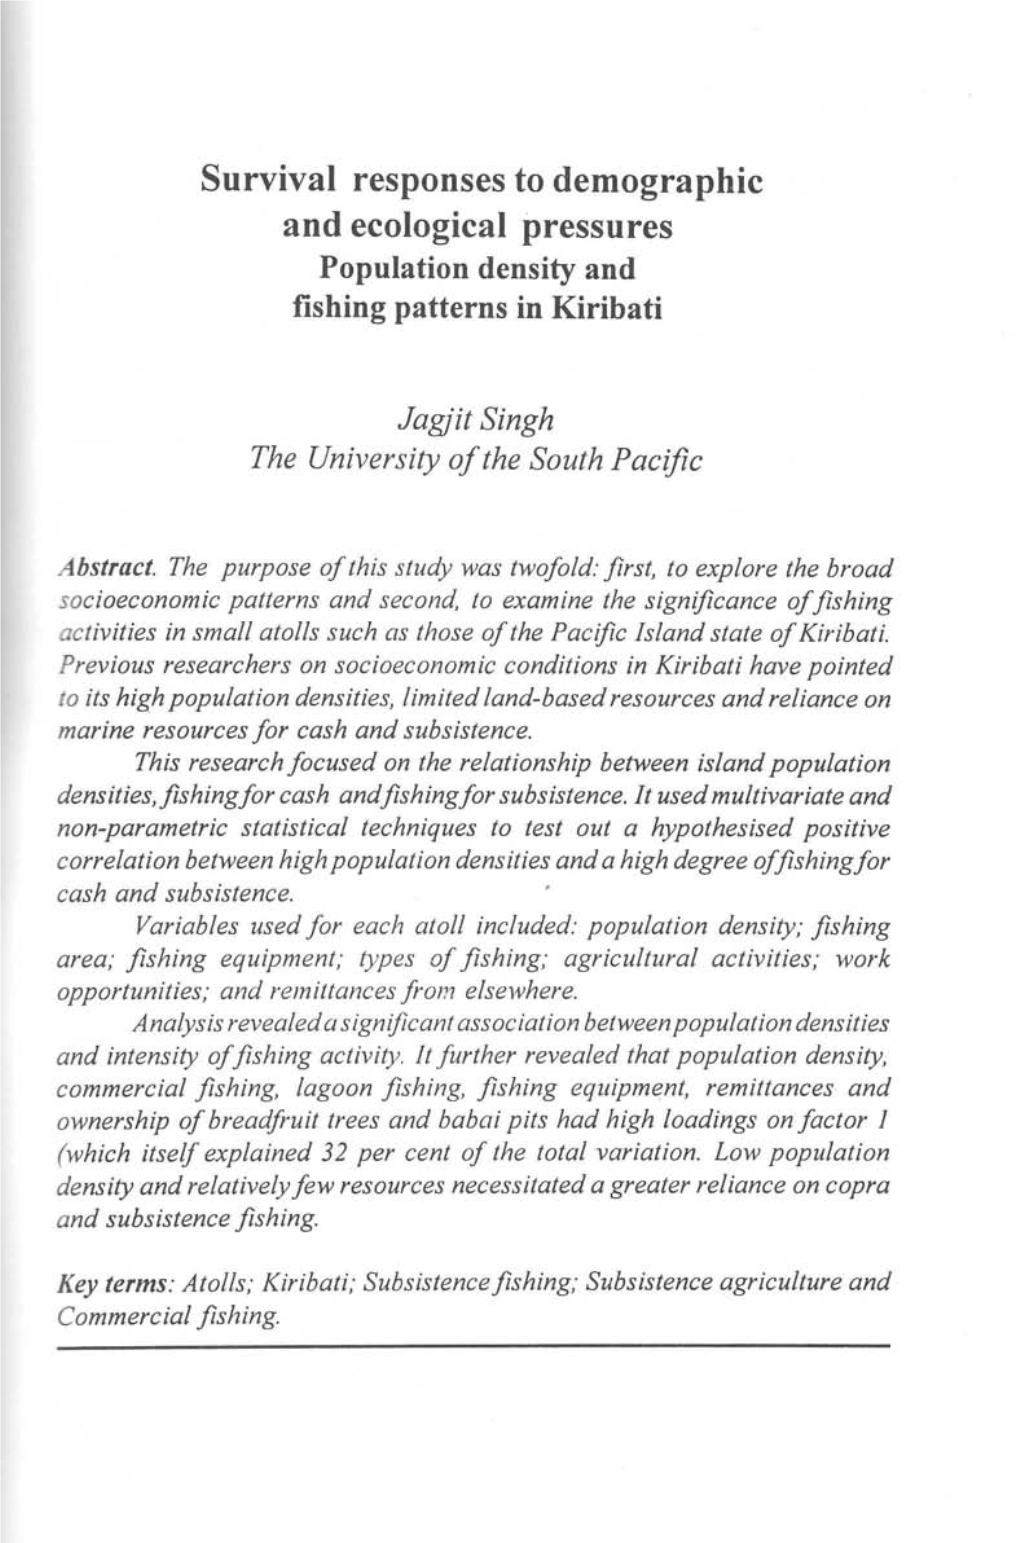 Survival Responses to Demographic and Ecological Pressures Population Density and Fishing Patterns in Kiribati